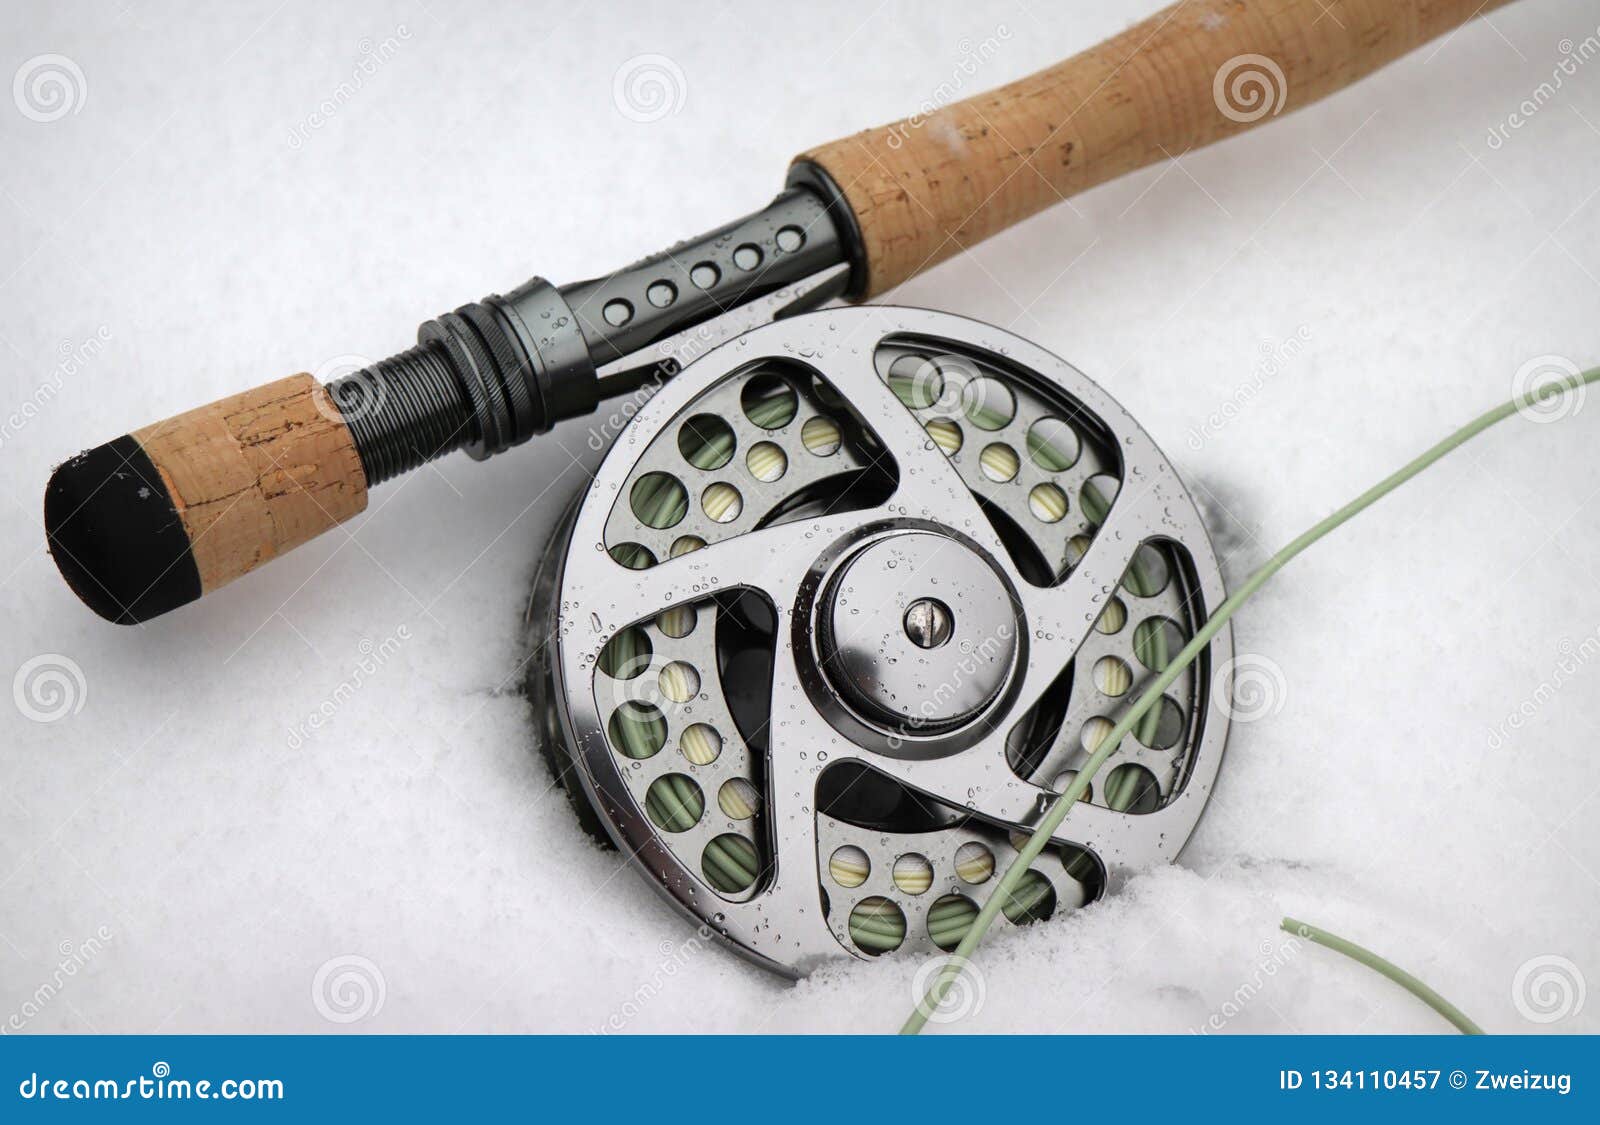 Fly Fishing Rod and Reel in the Snow Stock Image - Image of world ...